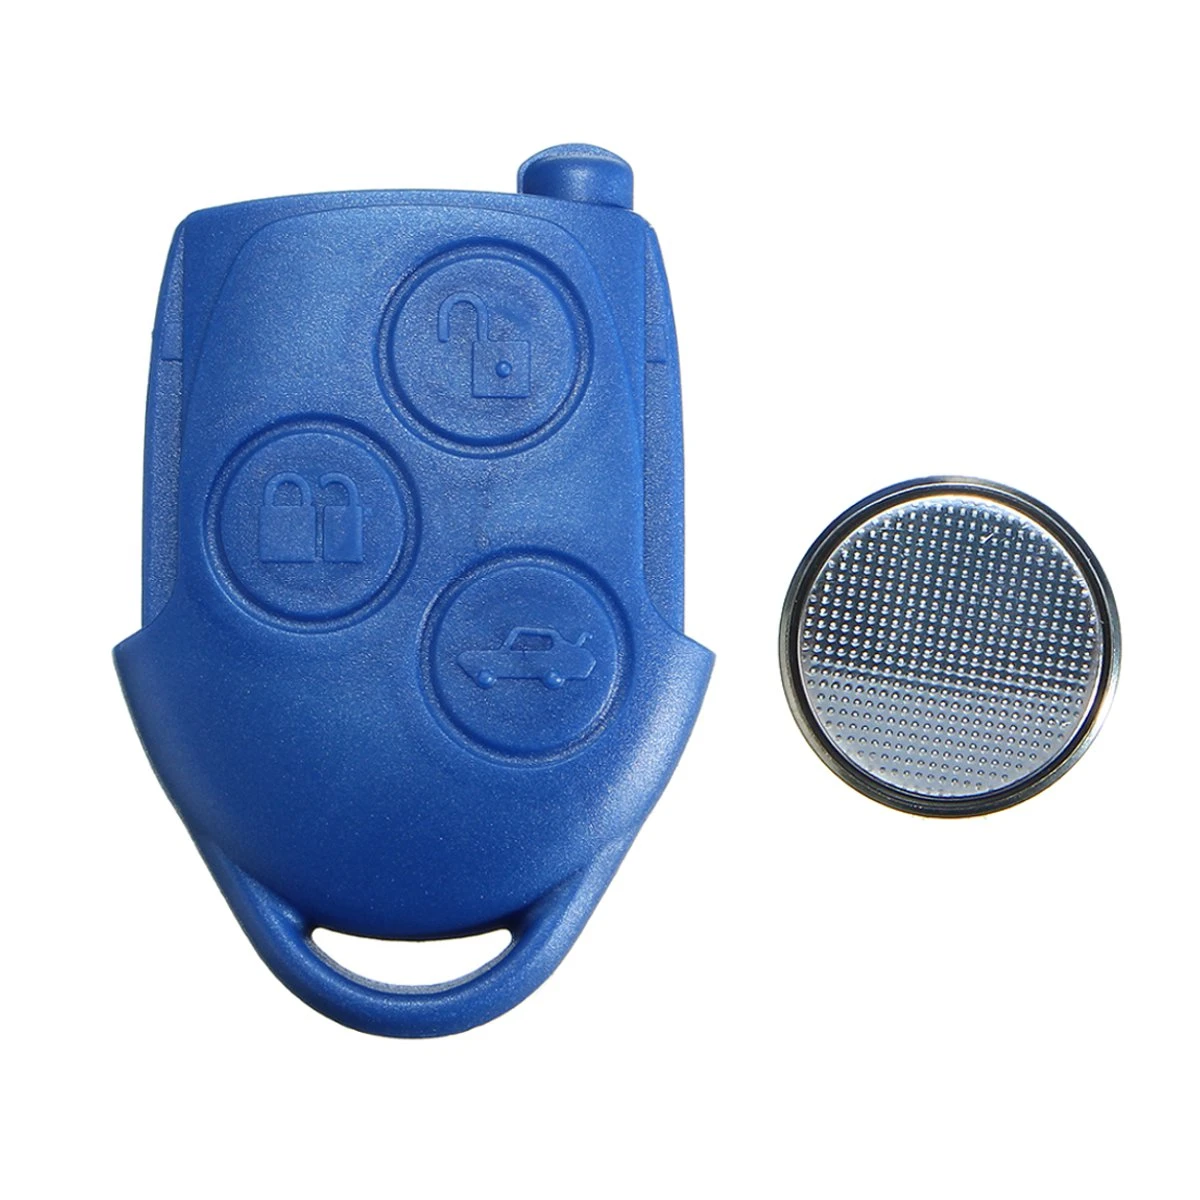 NEW 3 BUTTON BLUE REMOTE KEY FOB CASE SHELL for FORD TRANSIT MK7